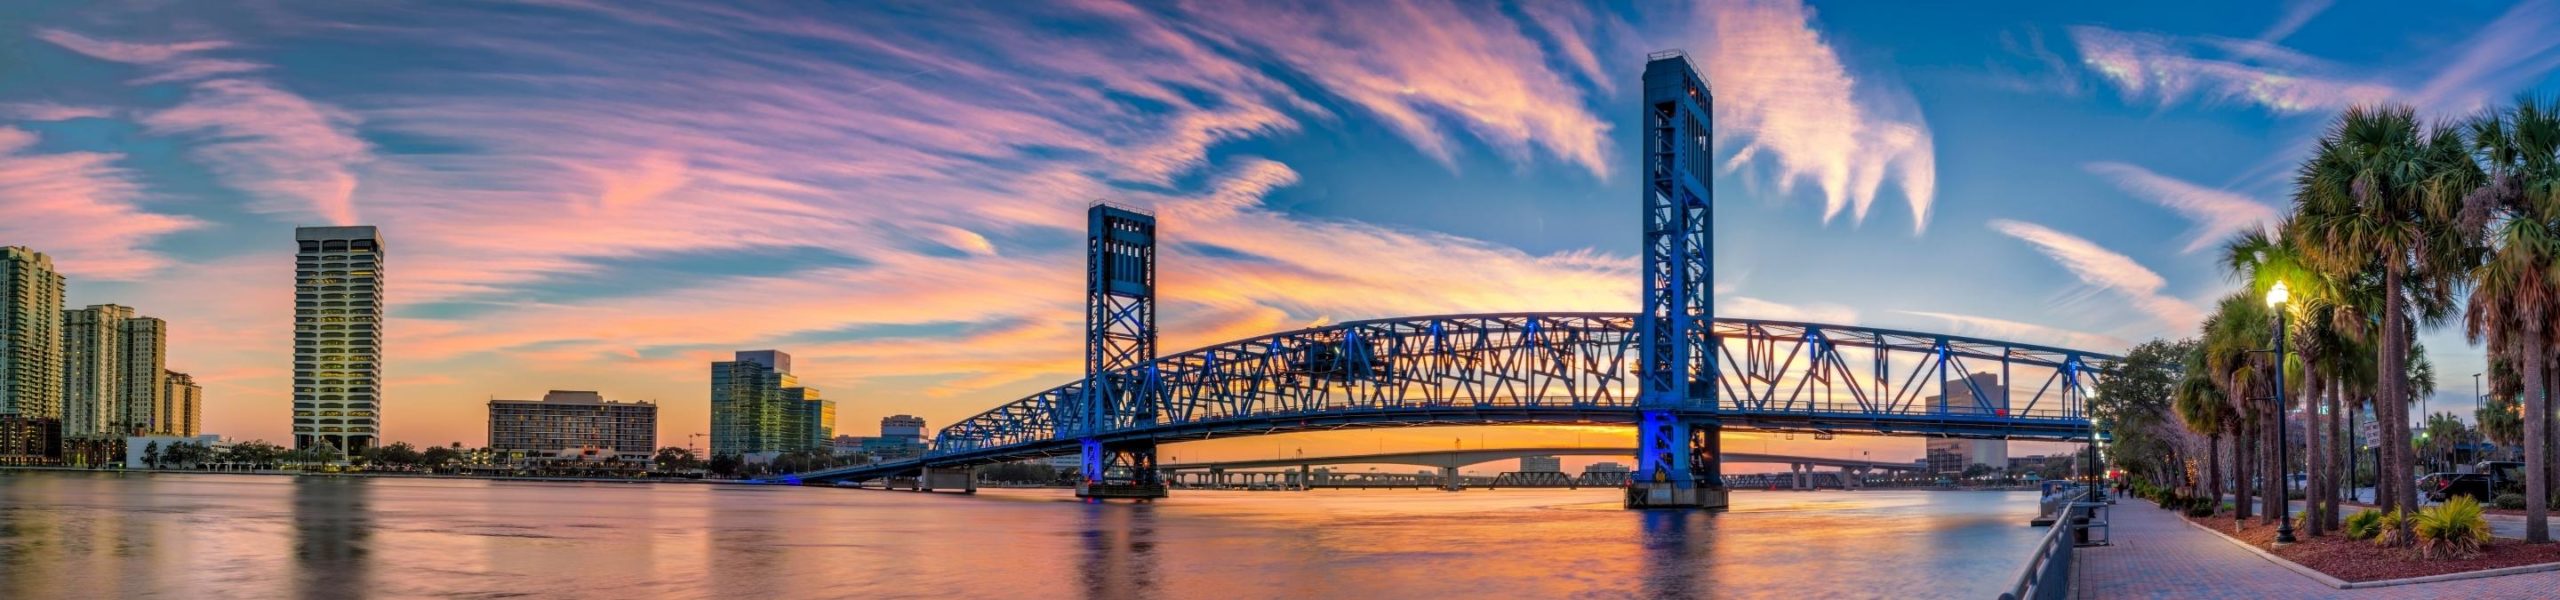 Jacksonville named second hottest real estate market for 2022 by Zillow.